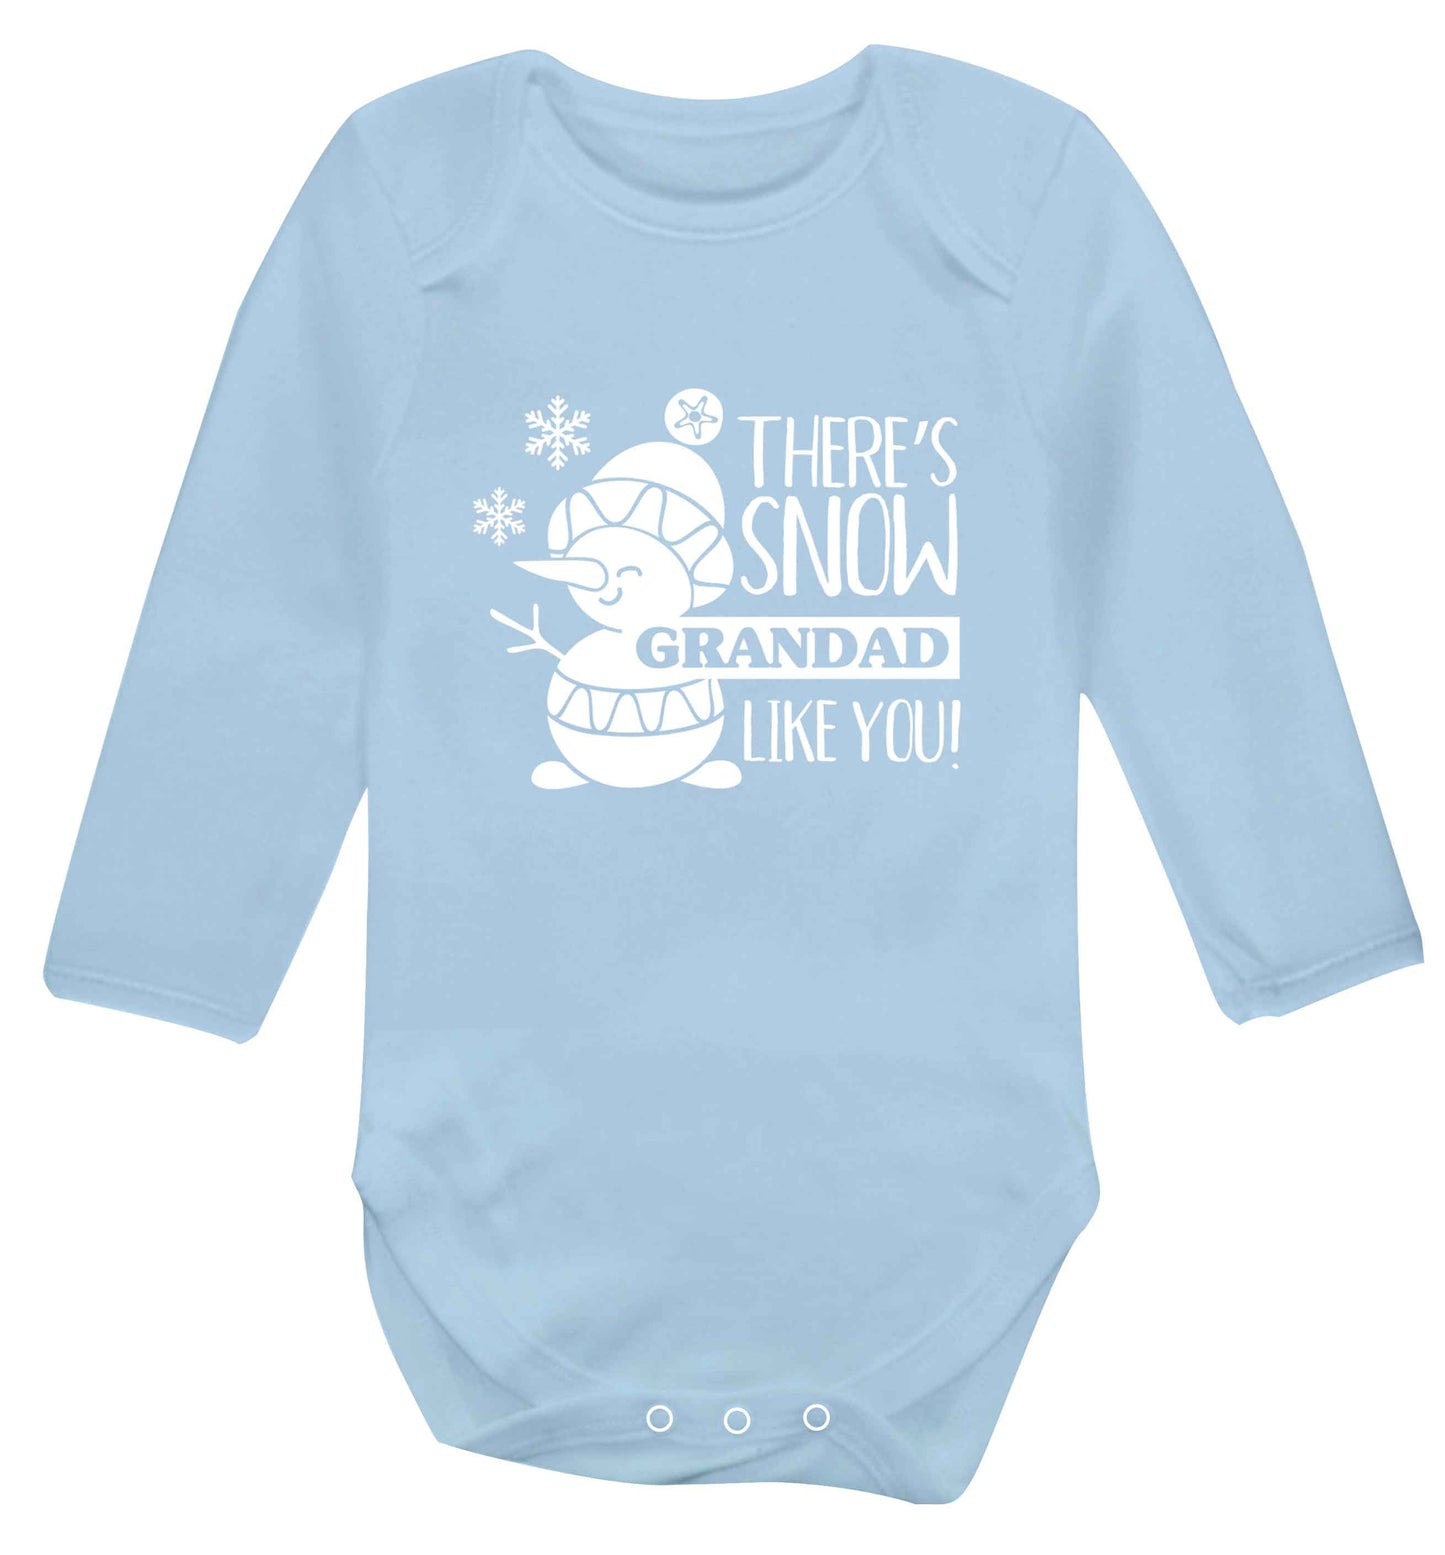 There's snow grandad like you baby vest long sleeved pale blue 6-12 months